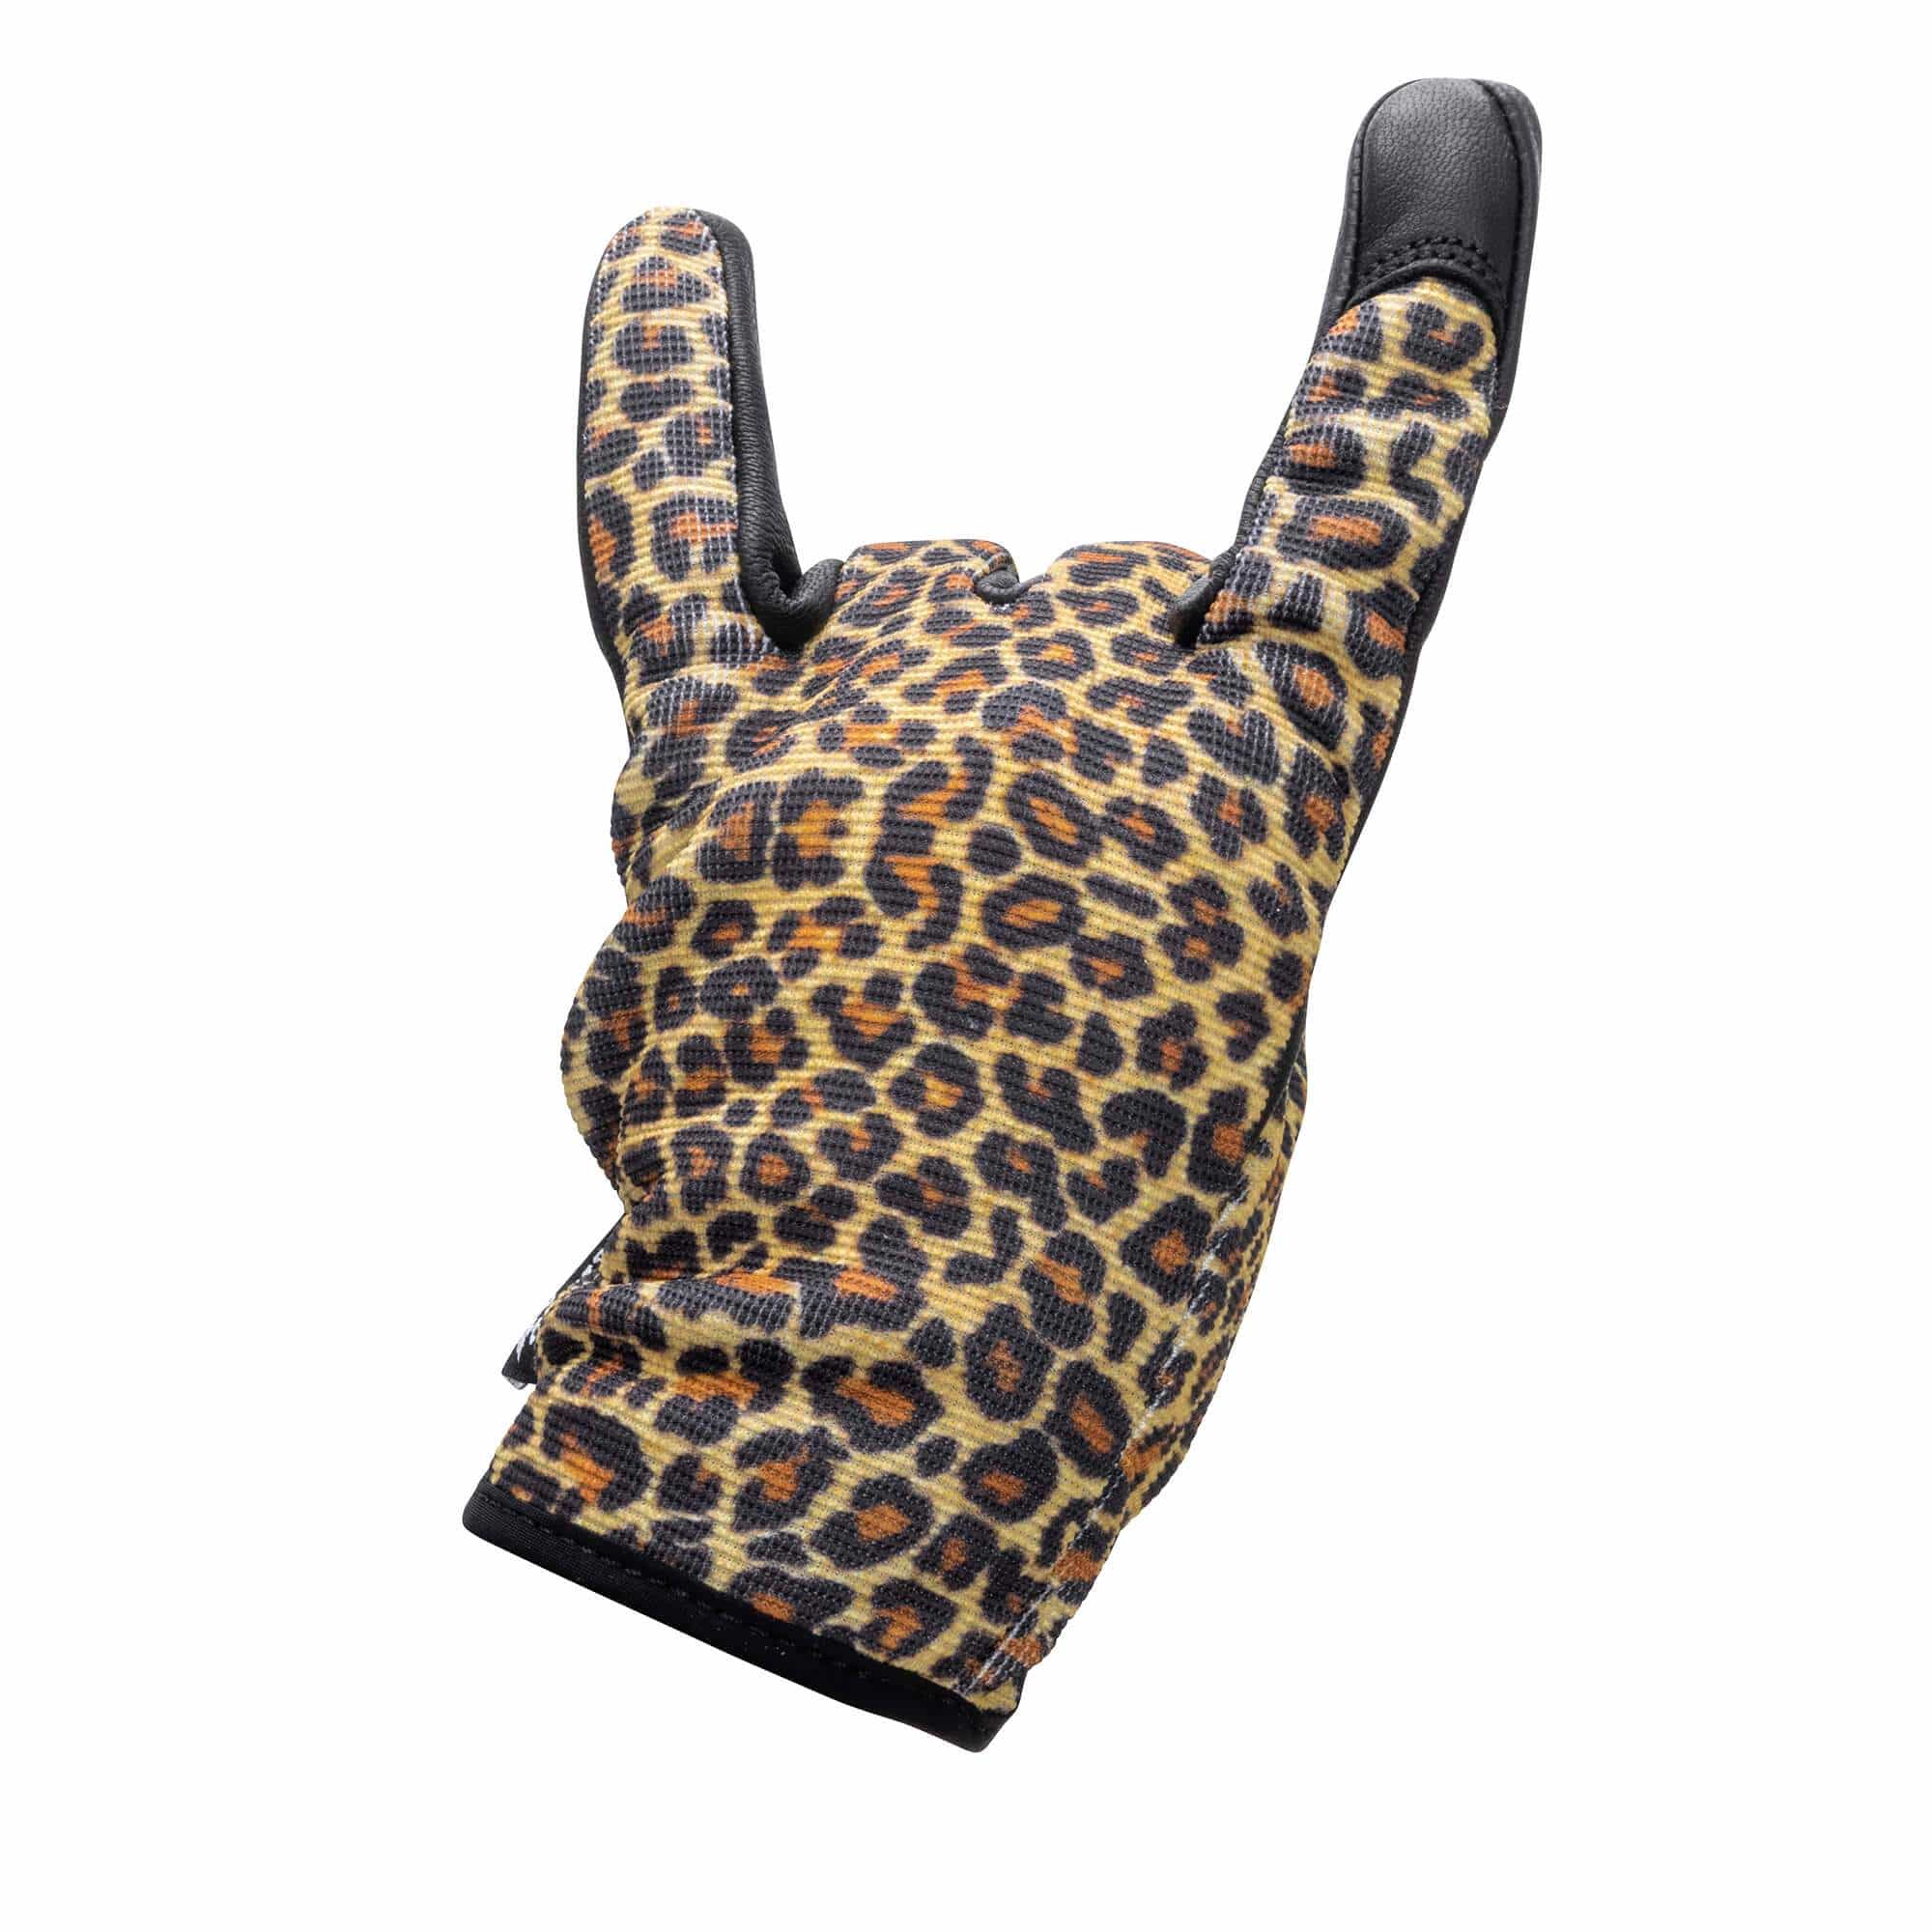 Axel Co. Leopard Print Mesh Top Gloves – Lowbrow Customs